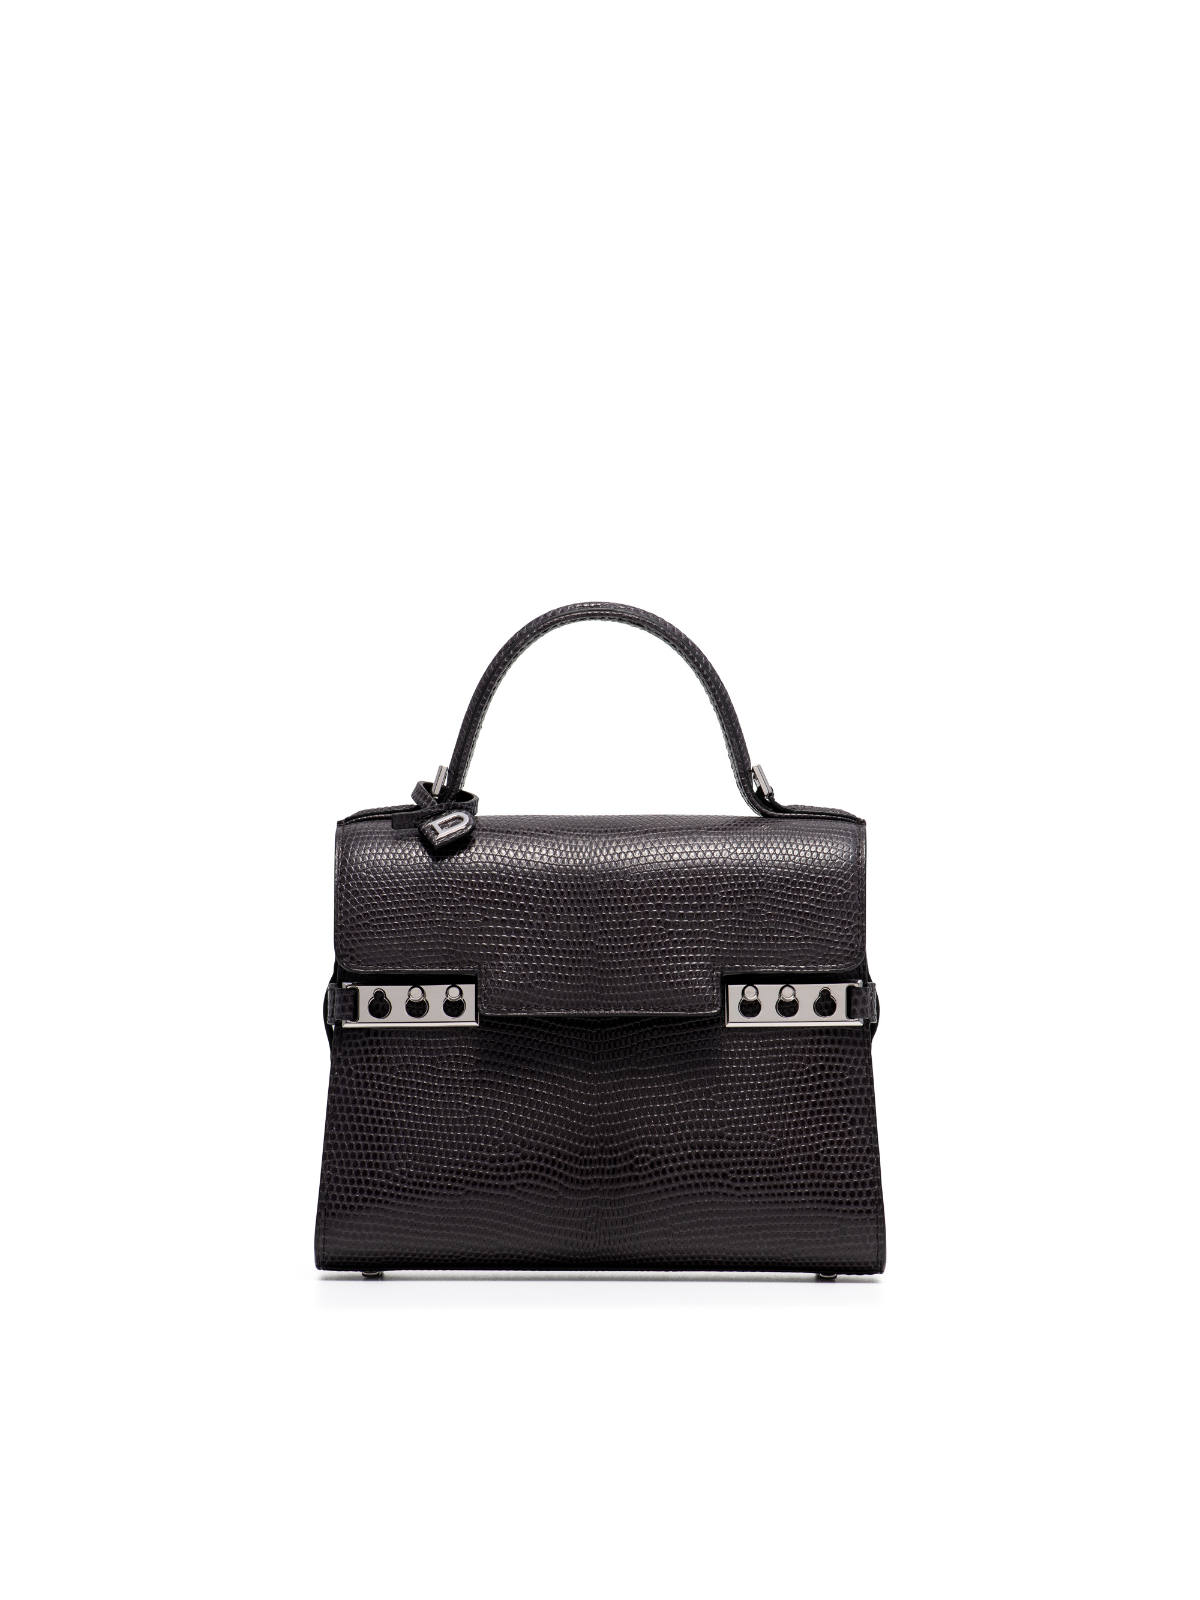 Delvaux Tempete PM Himalaya Crocodile Limited Edition Bag in 2023